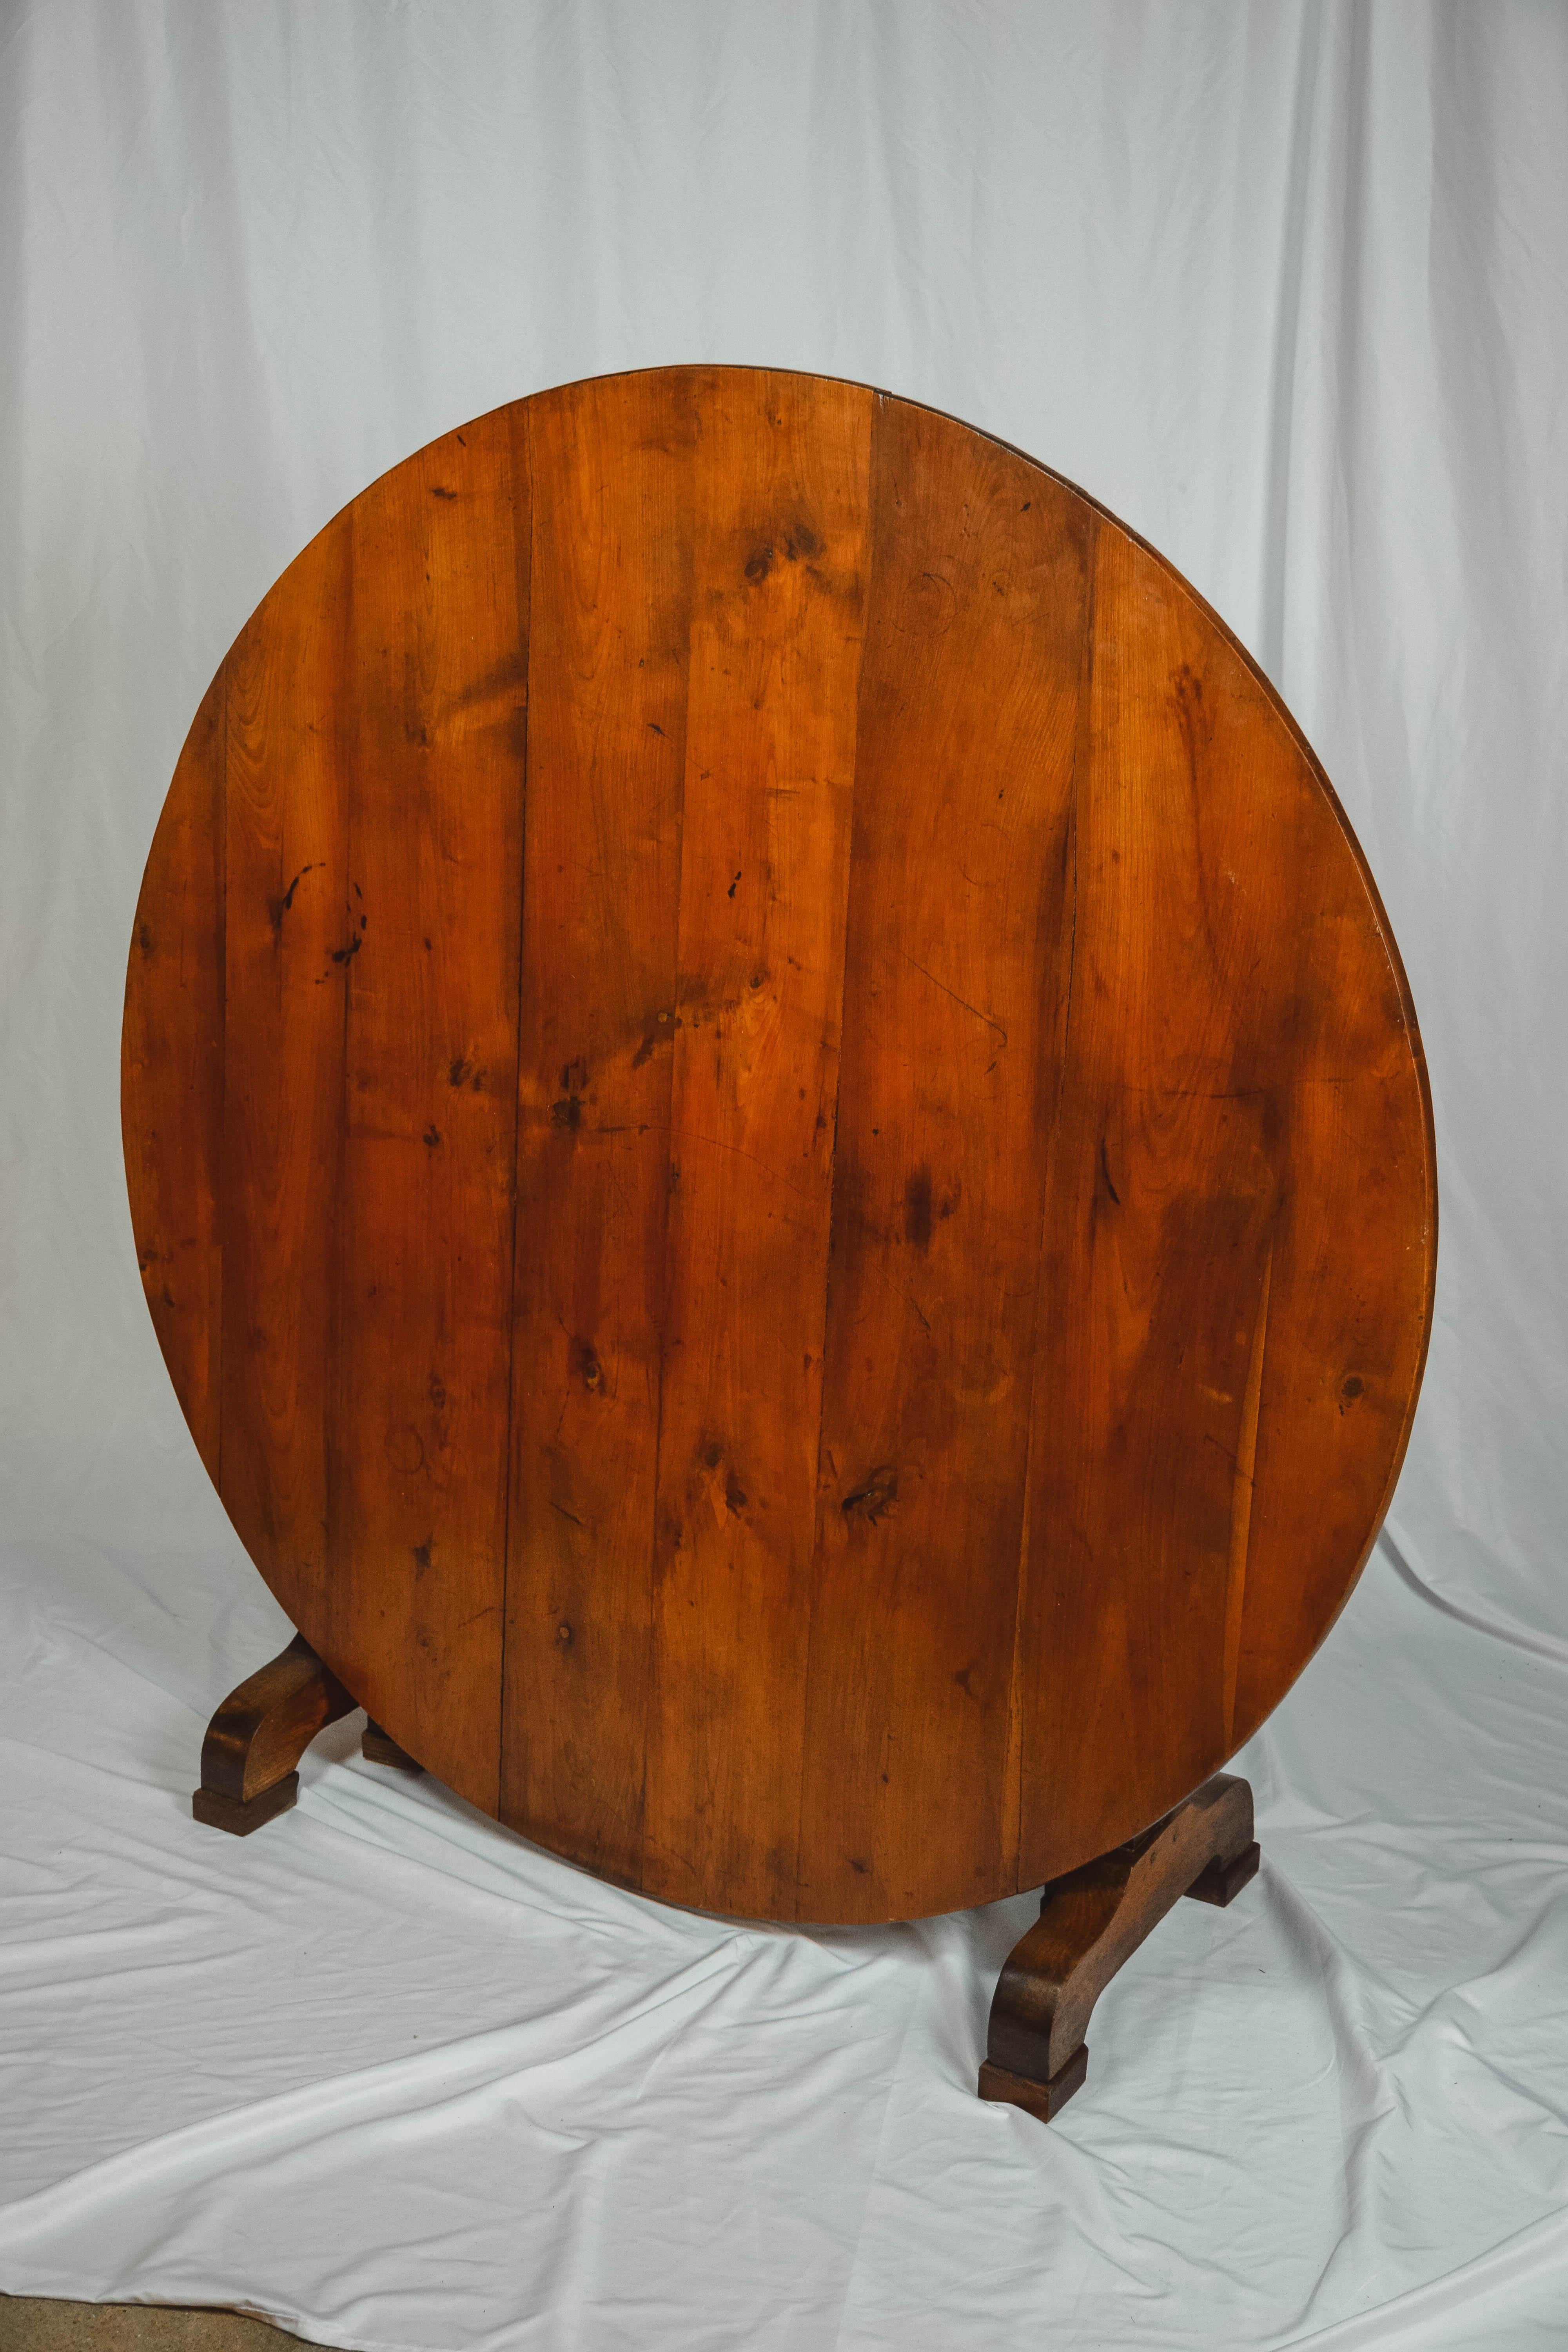 French wine tasting table, also known as a vendage or vigeron table, which was once used in the vineyards of France for tasting wine or enjoying a meal. This table would be suitable for use in a breakfast area or wine cellar. Featuring a tilt-top,